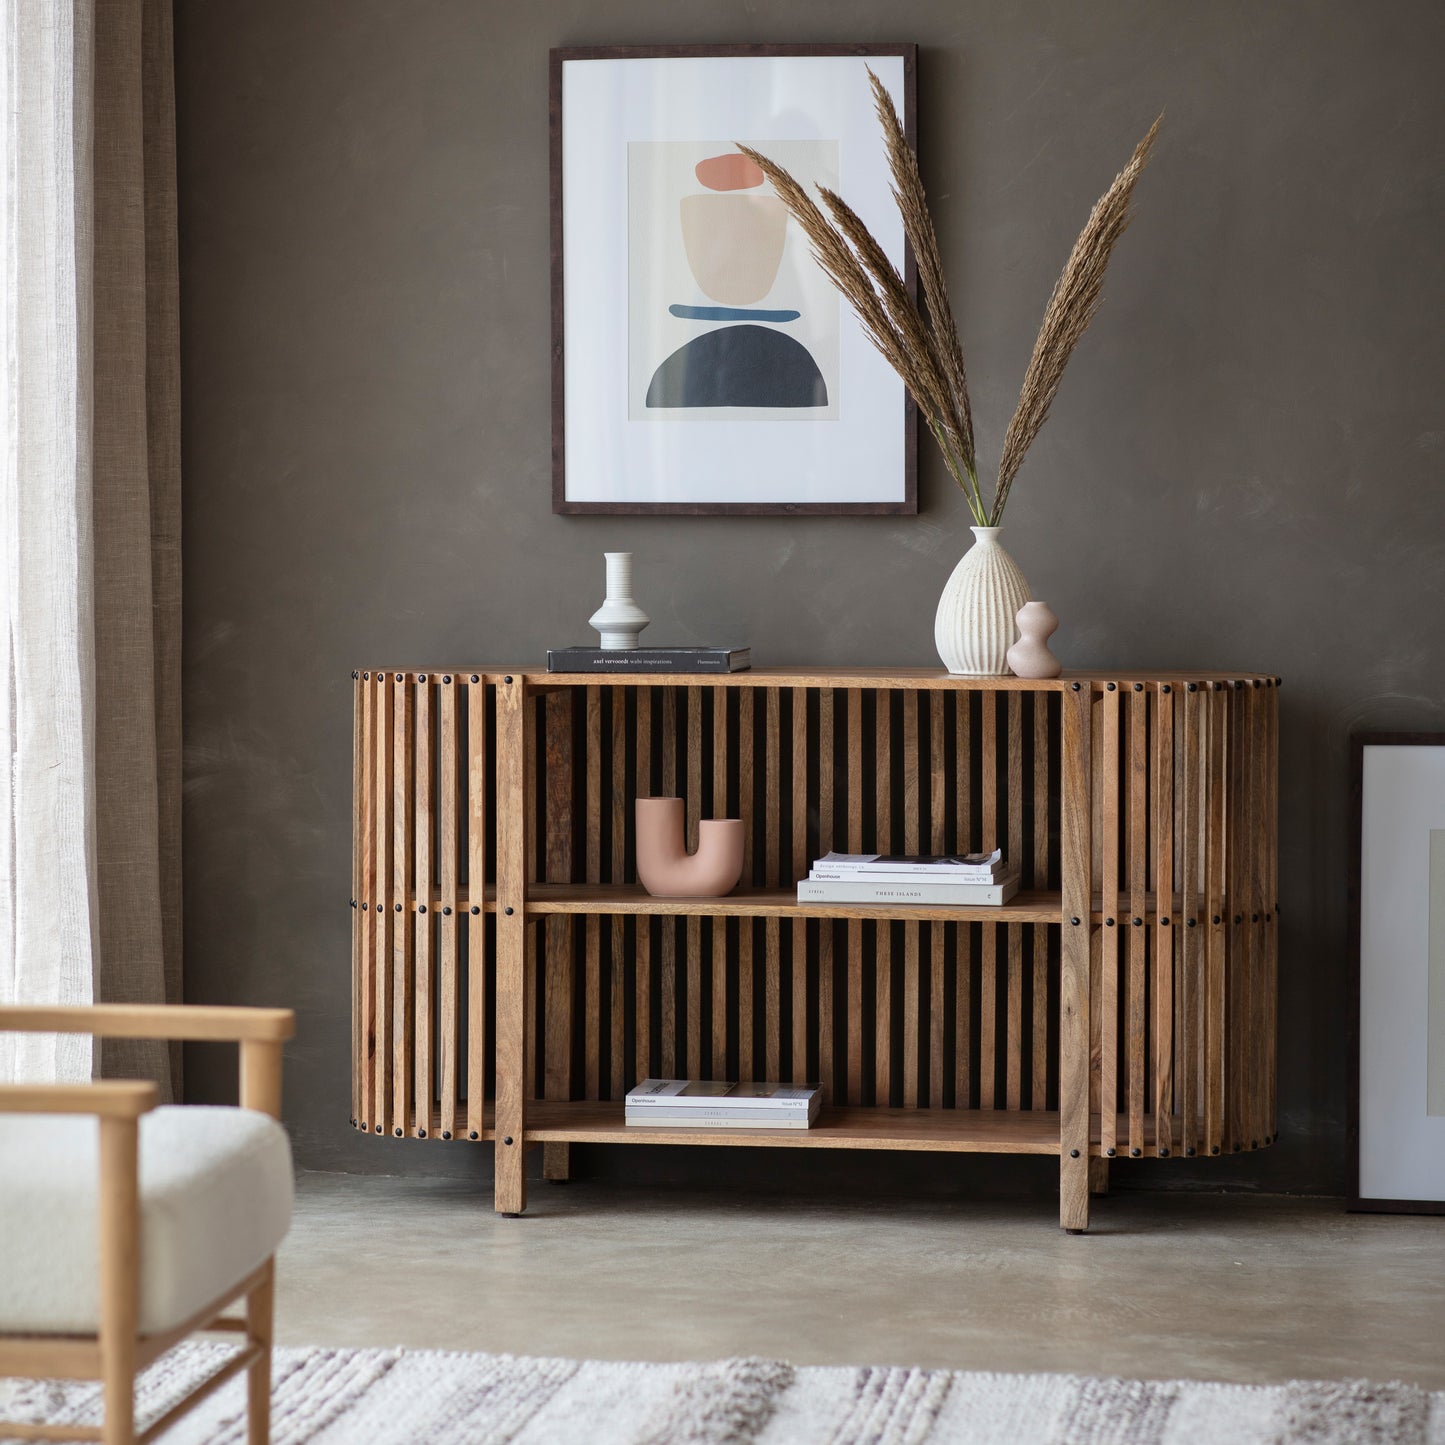 A Voss Slatted Console Table 1400x400x700mm by Kikiathome.co.uk enhances the interior decor of a living room.